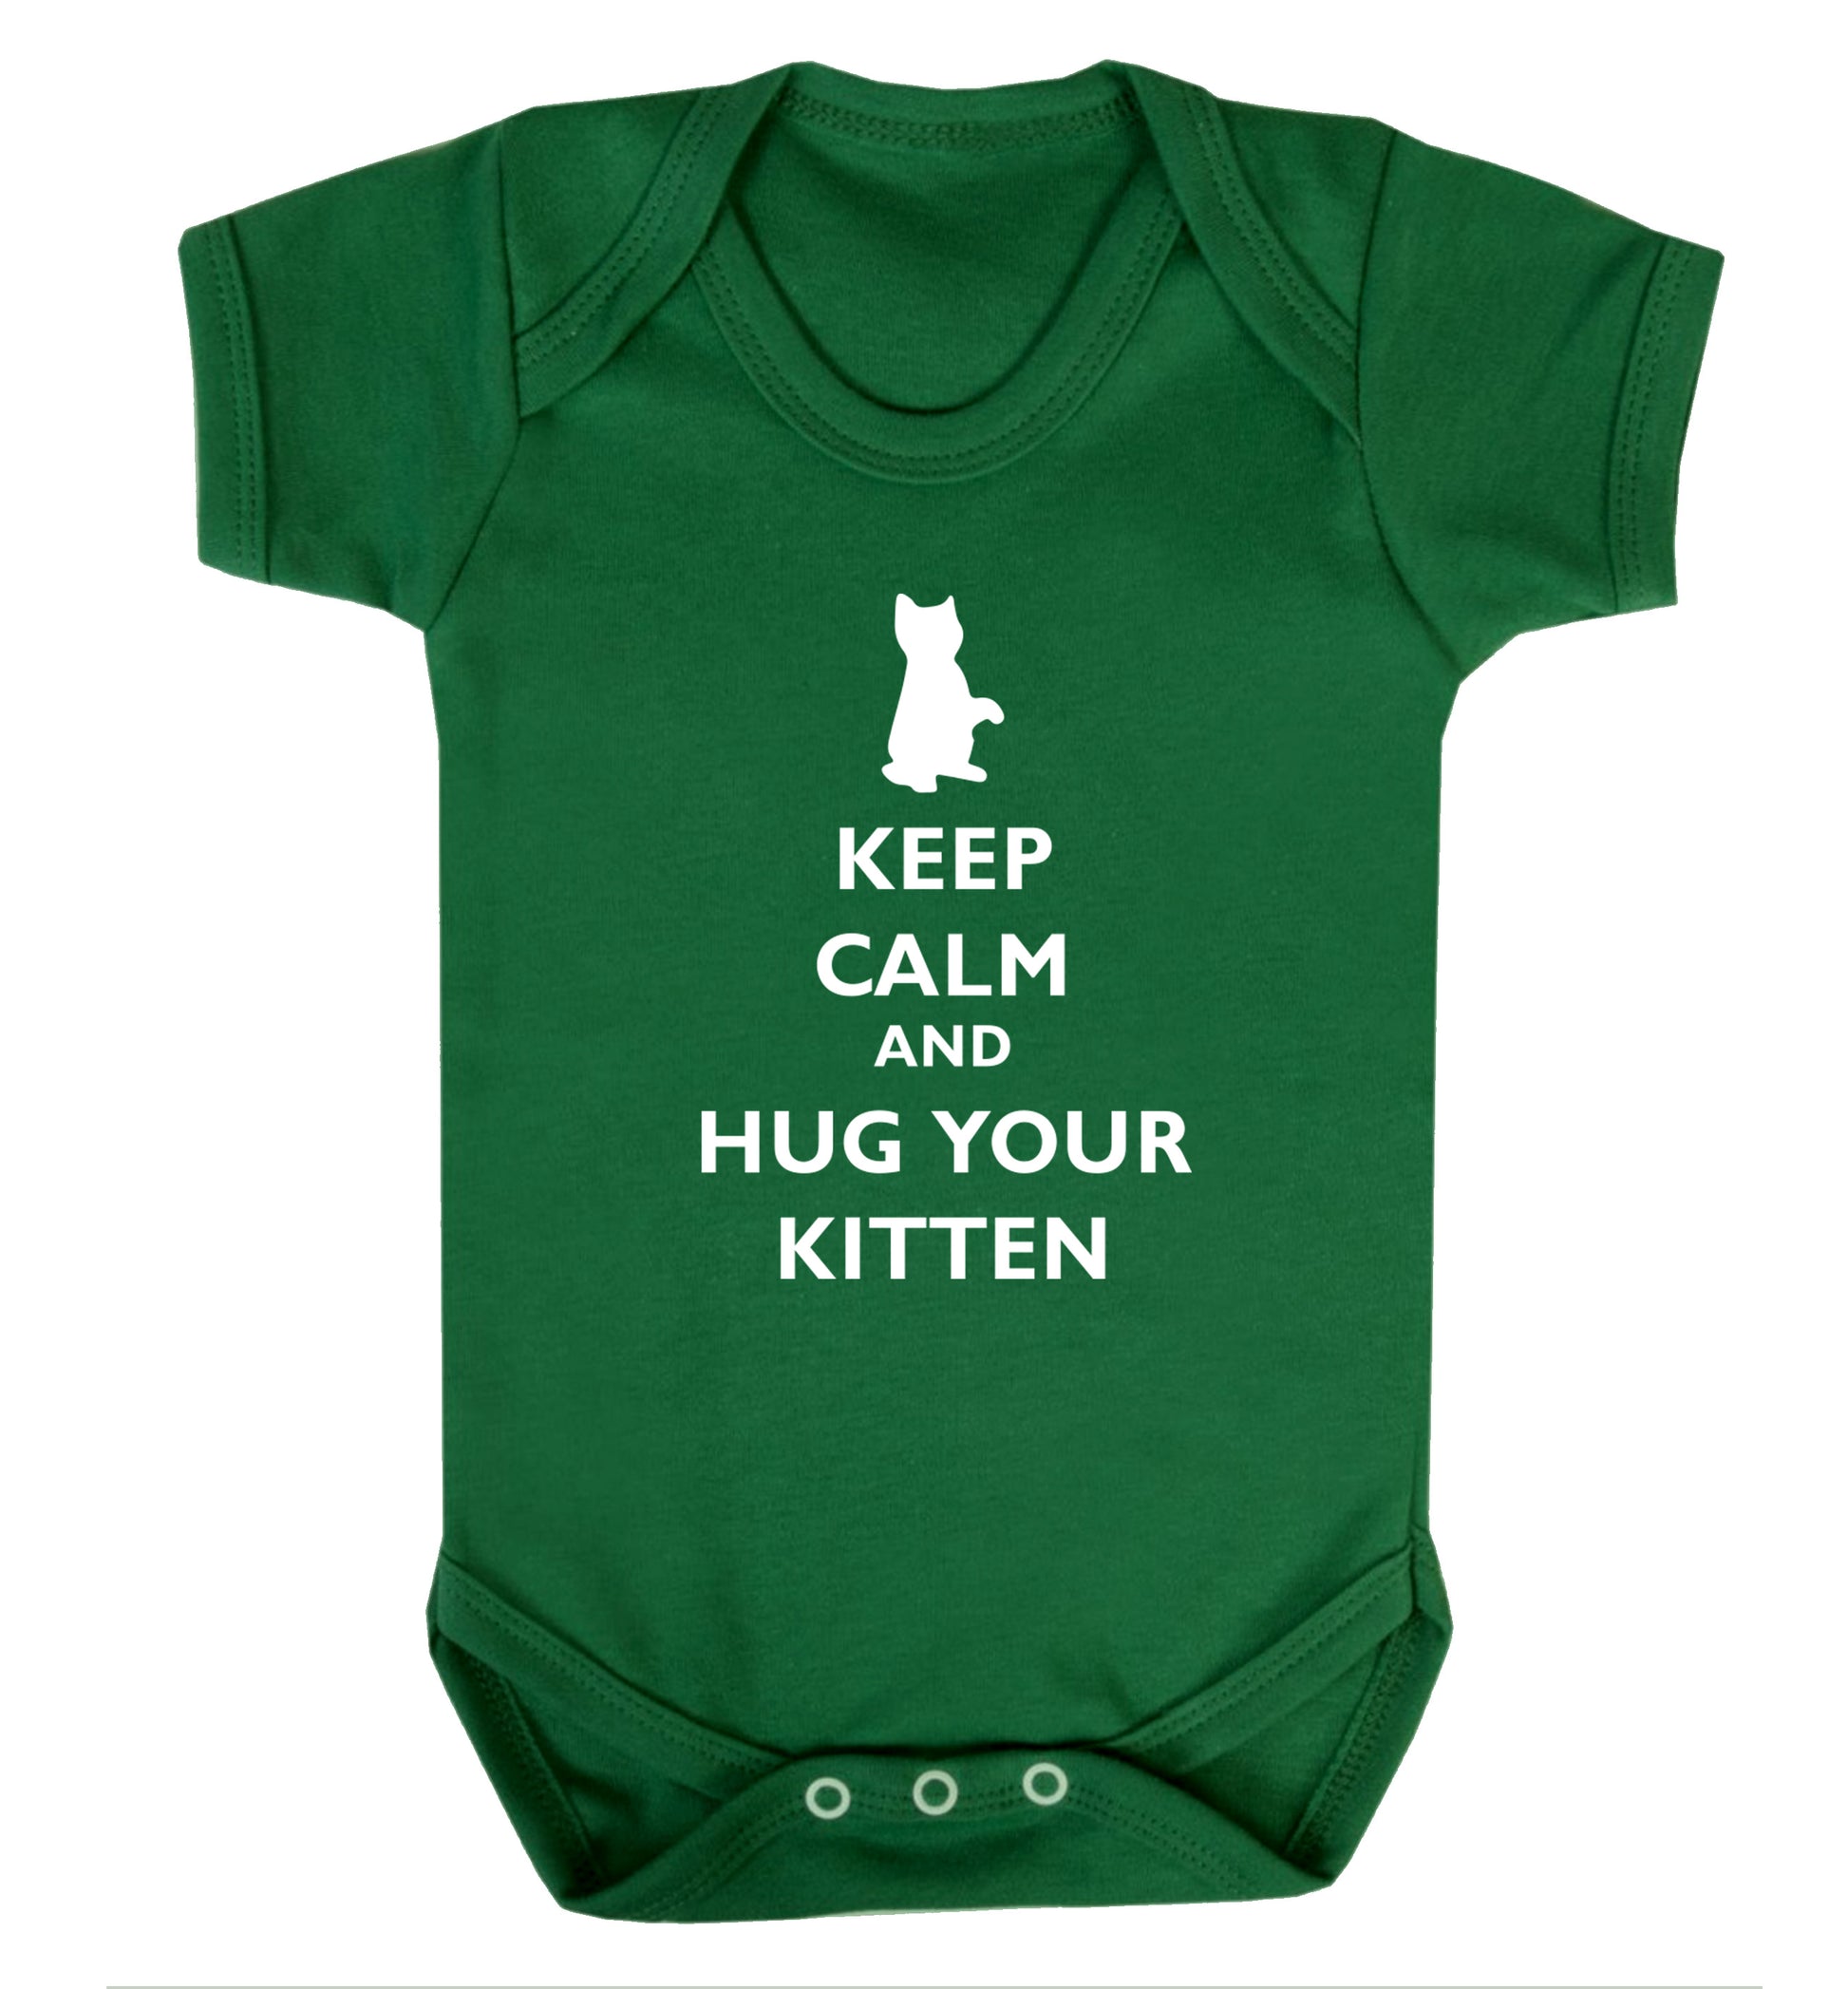 Keep calm and hug your kitten Baby Vest green 18-24 months